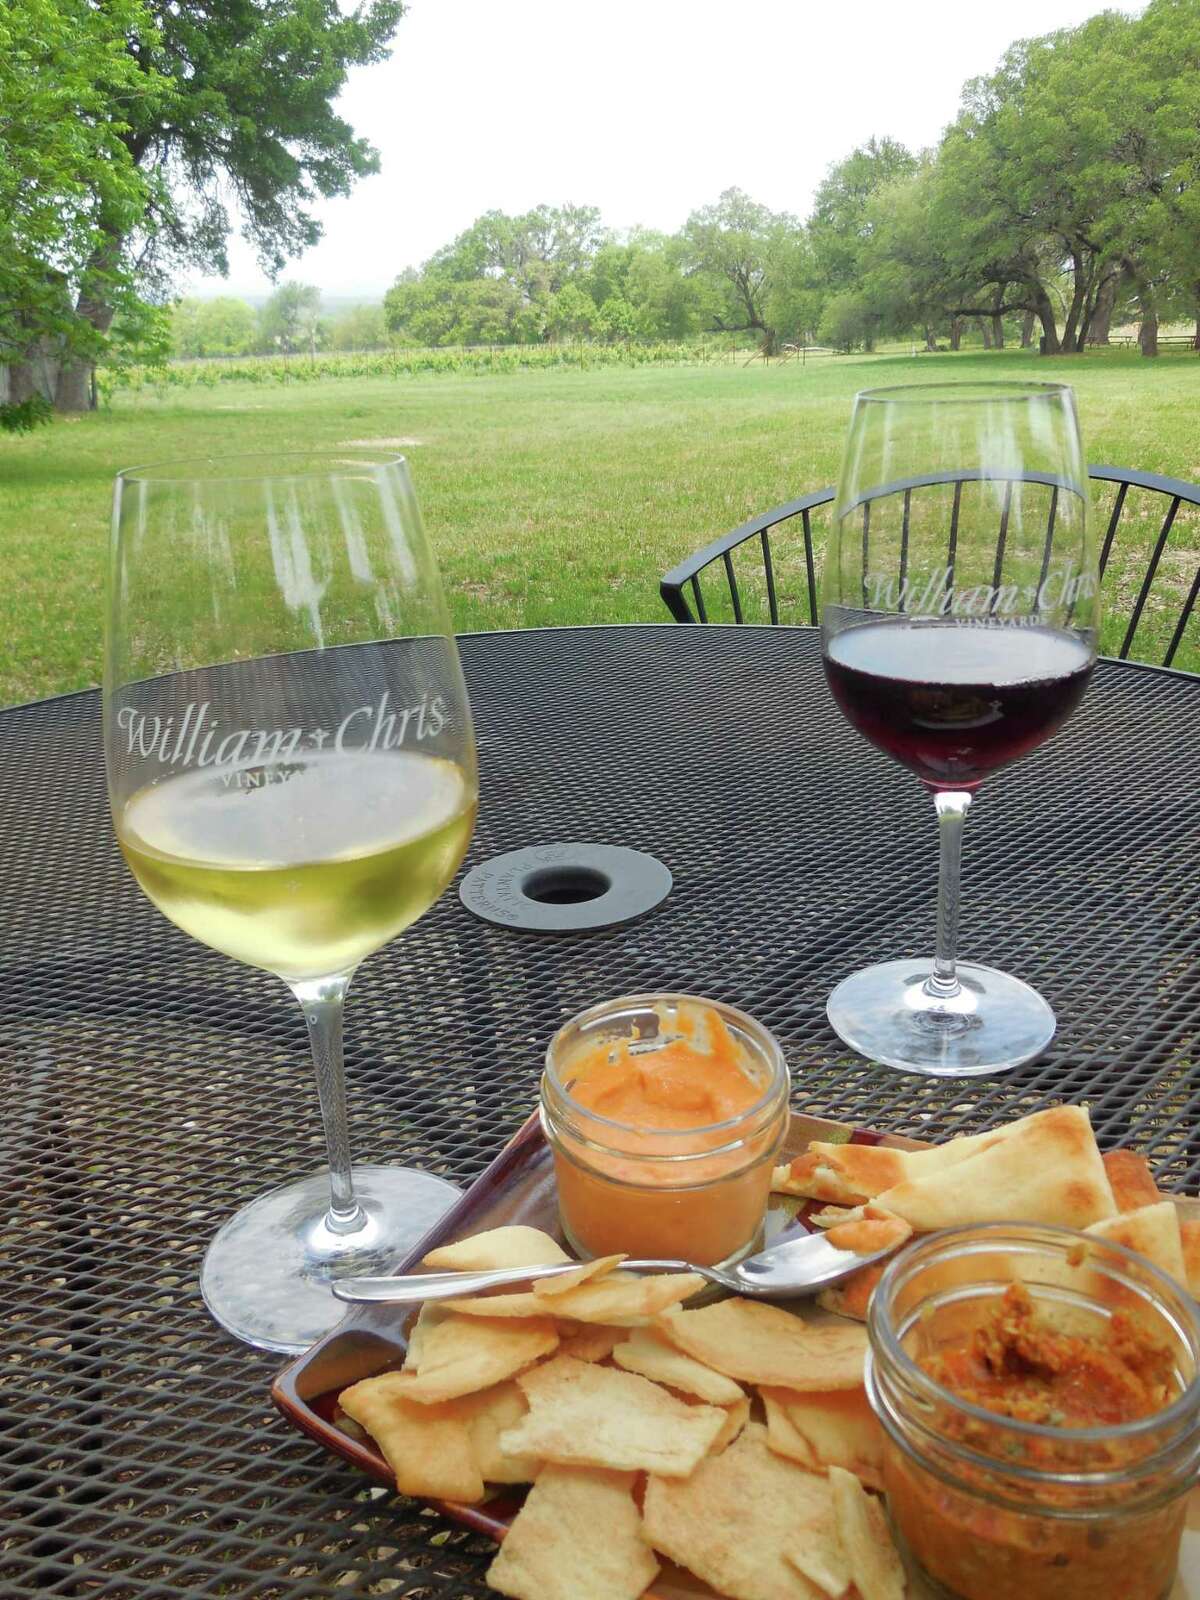 The William Chris Vineyard in Hye is one of more than two-dozen stops on U.S. 290 east of Fredericksburg.